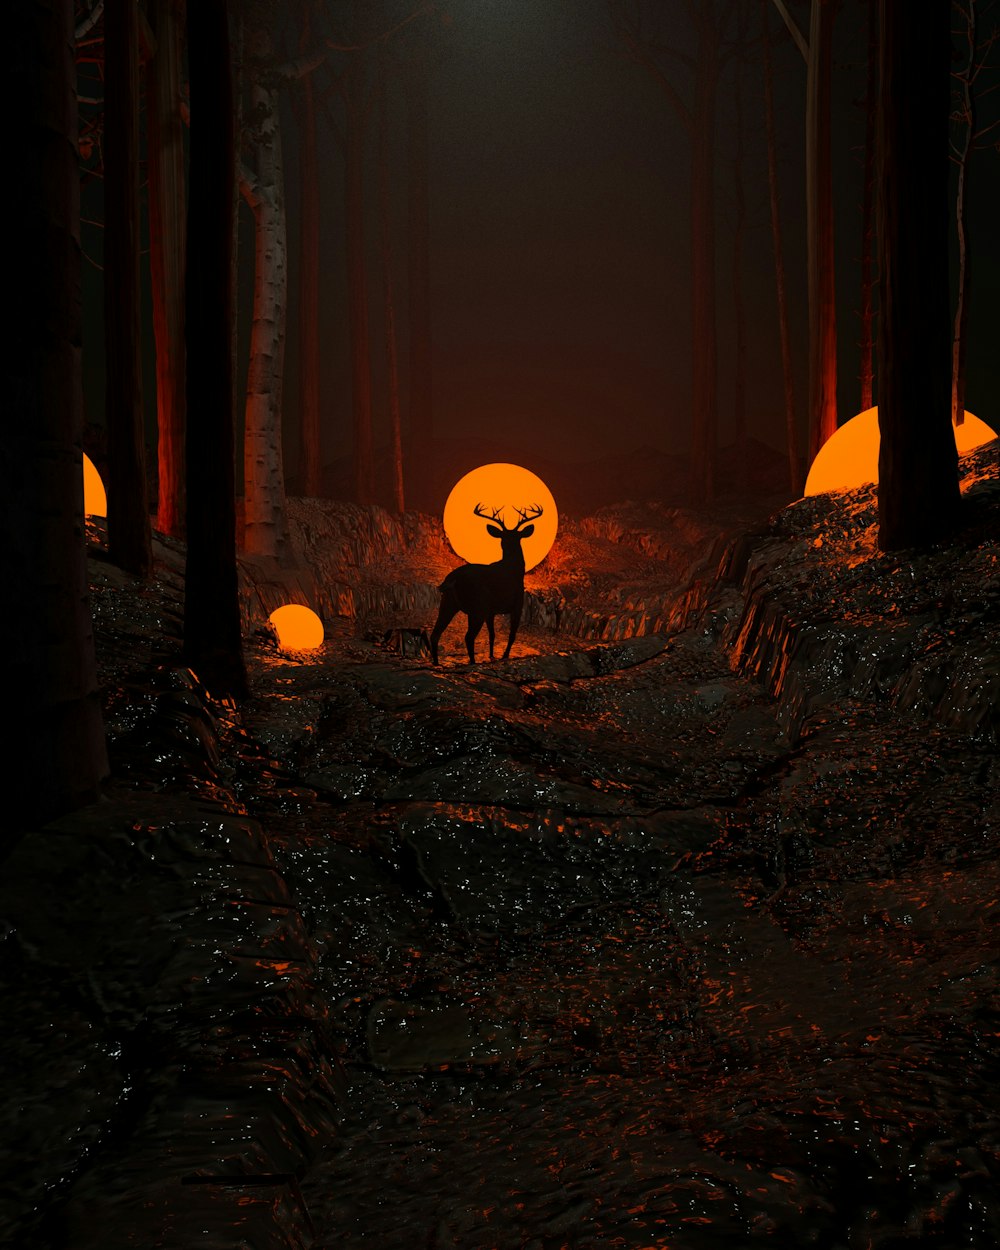 a deer standing in the middle of a forest at night